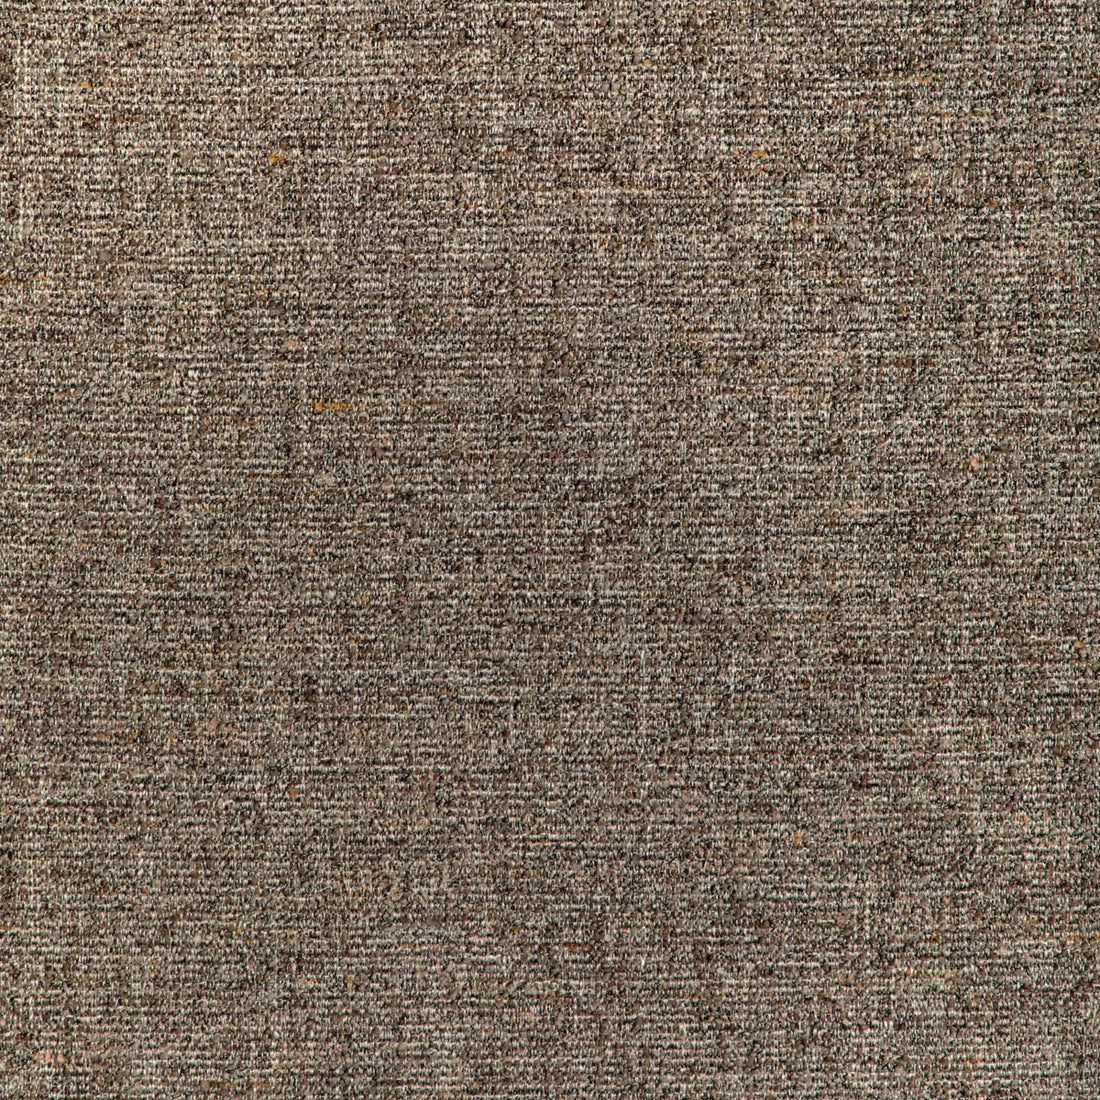 Mireille Texture fabric in taupe color - pattern 8023128.1611.0 - by Brunschwig &amp; Fils in the Arles Weaves collection